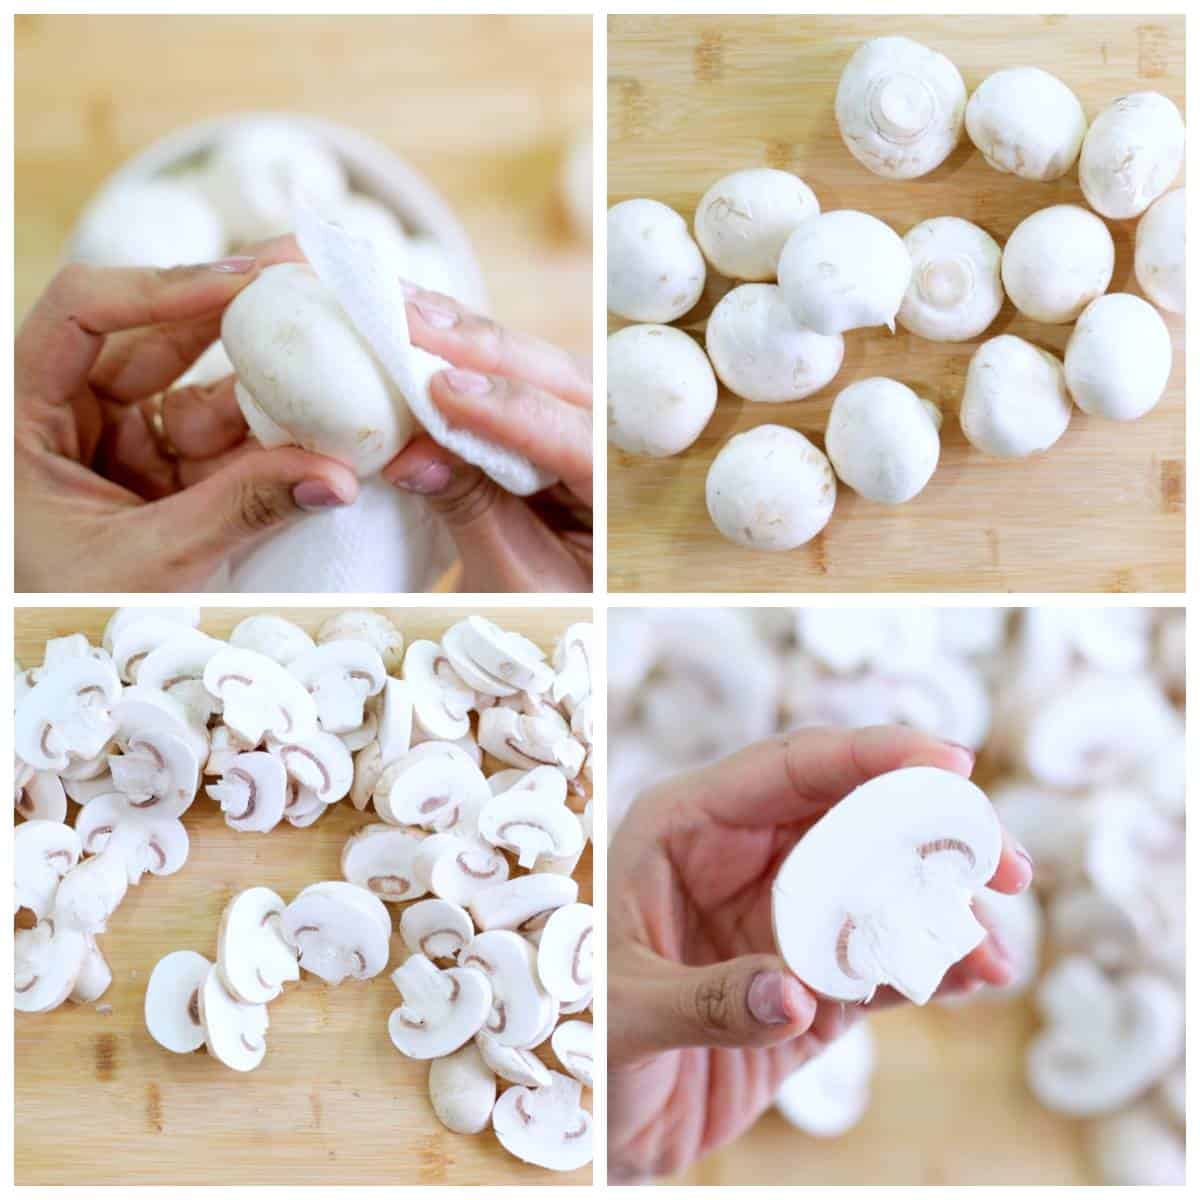 Steps for how to clean mushrooms